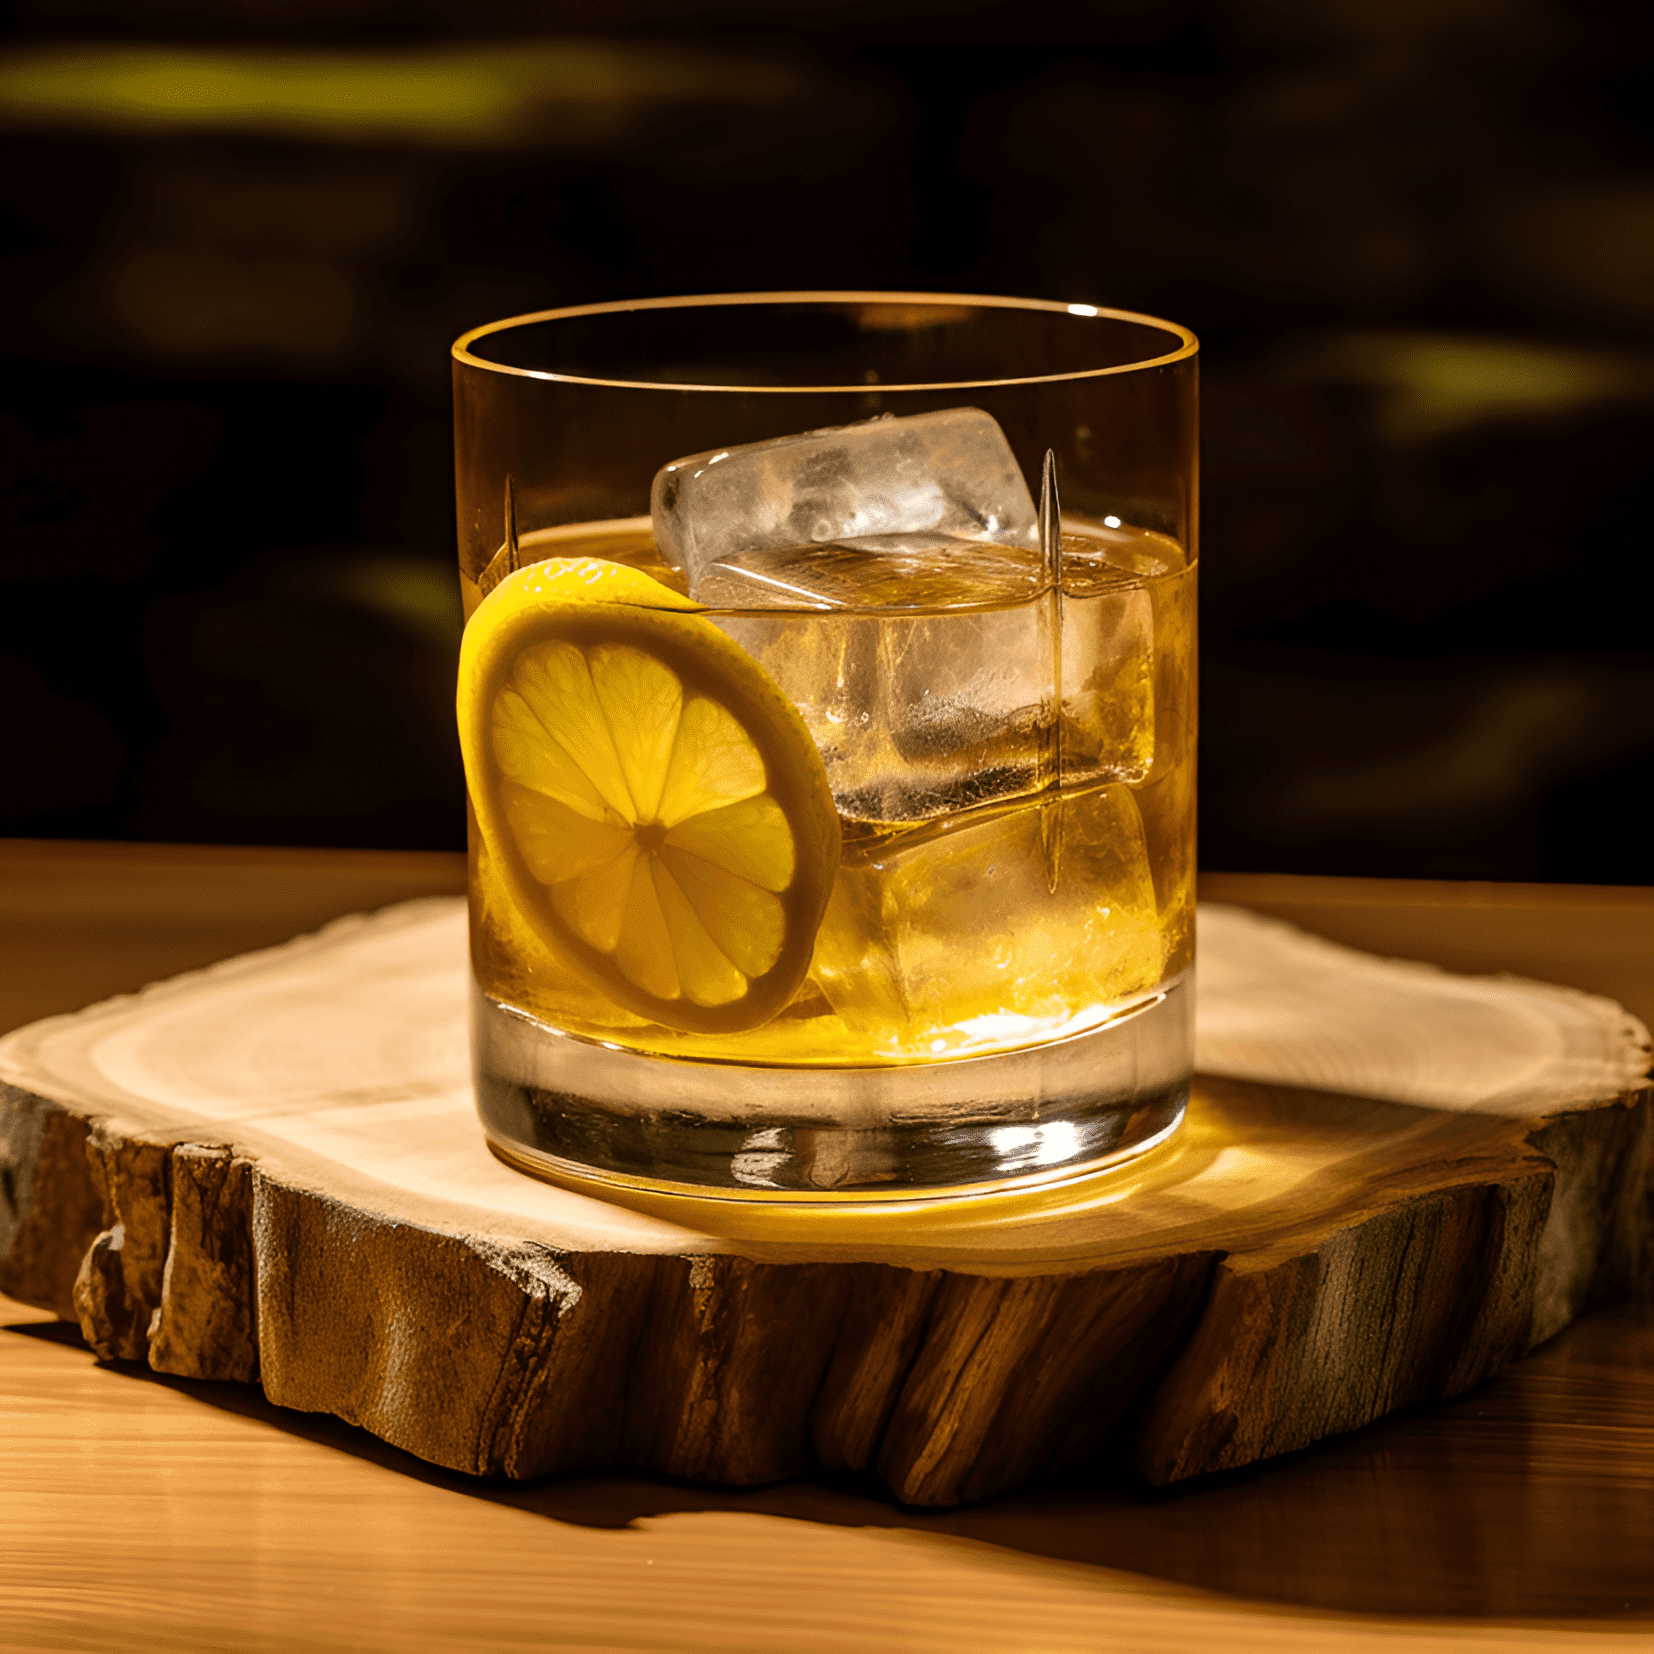 Montana Cocktail Recipe - The Montana cocktail has a bold, robust flavor with a hint of sweetness. It is a strong, full-bodied drink with a smooth finish. The combination of whiskey, vermouth, and bitters creates a complex taste profile that is both warming and refreshing.